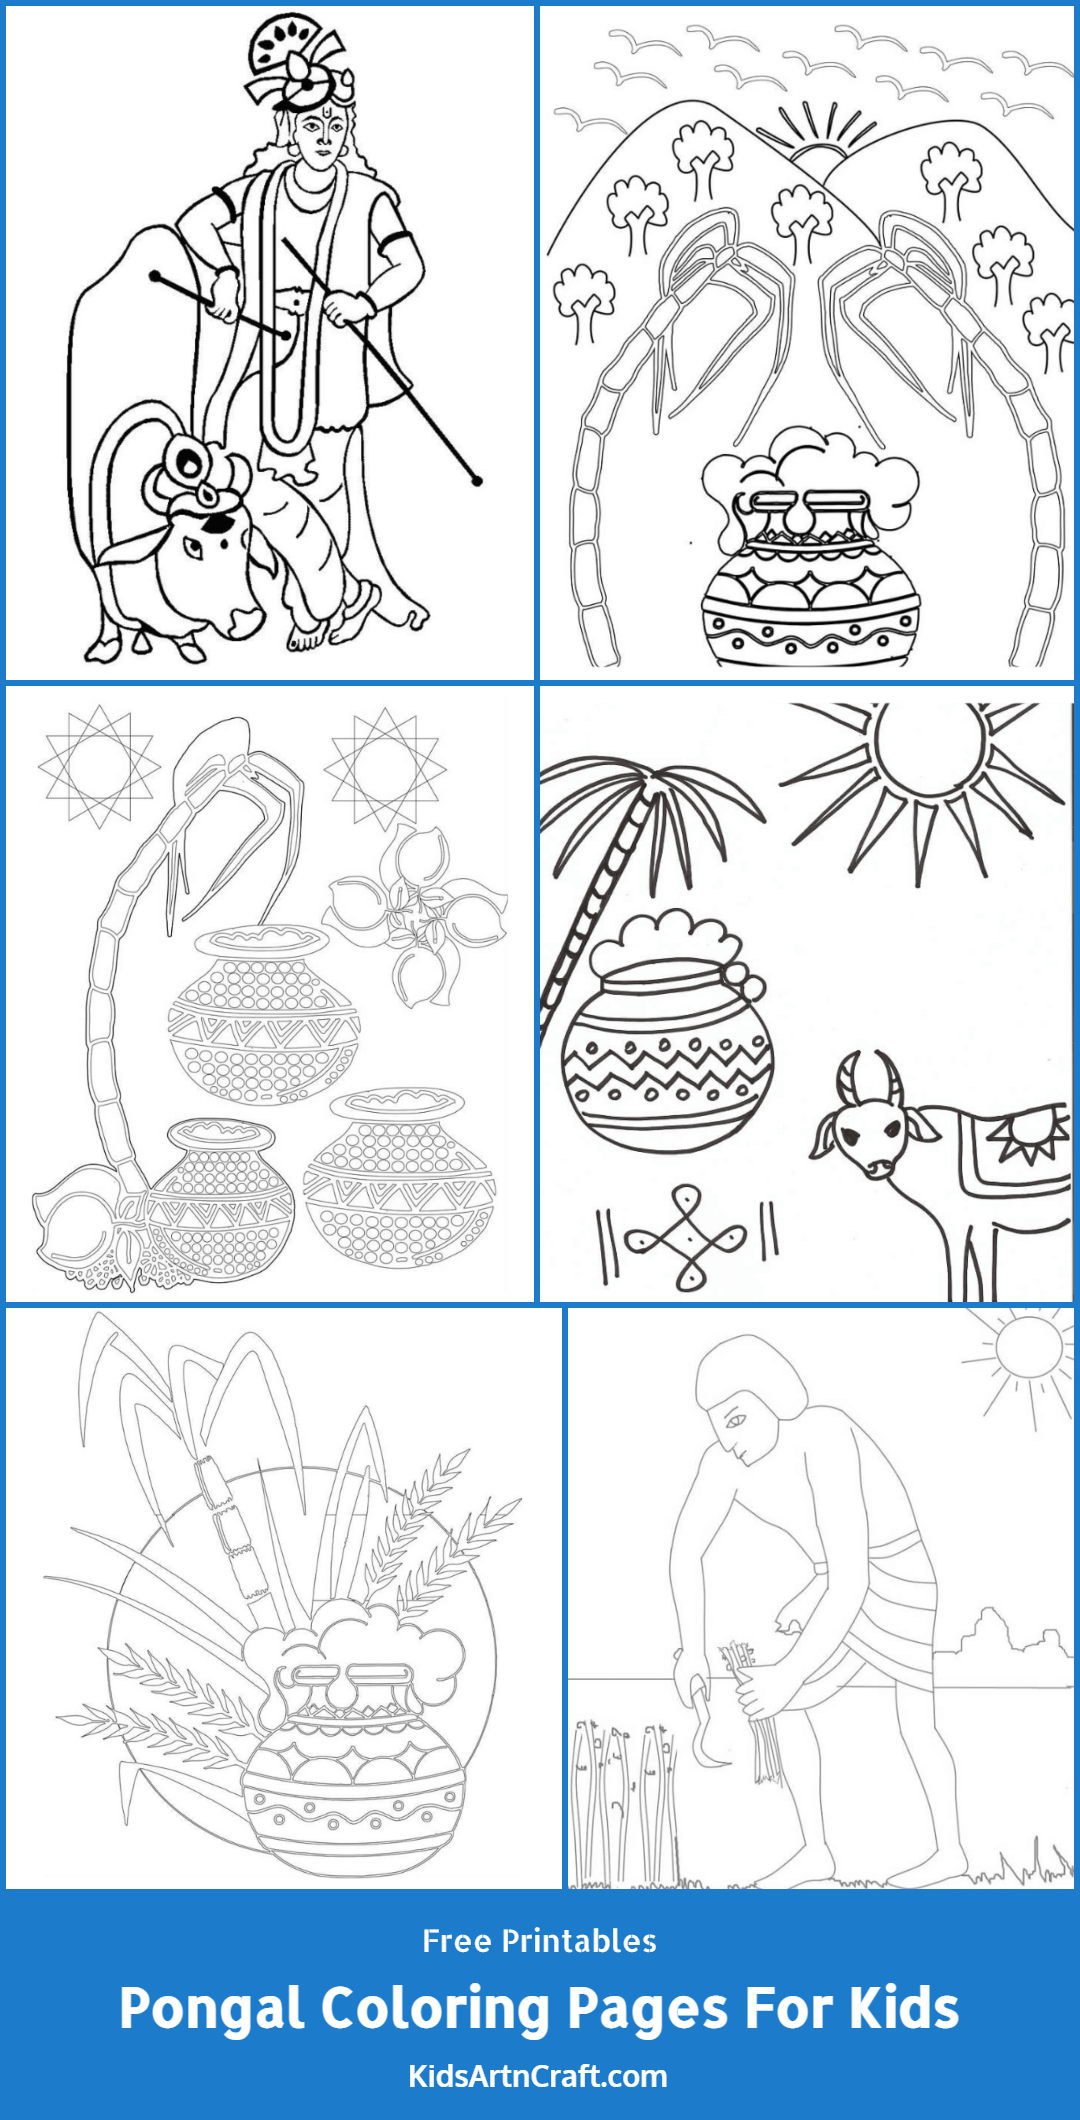 Pongal / Sankranti Coloring Pages For Kids – Free Printables